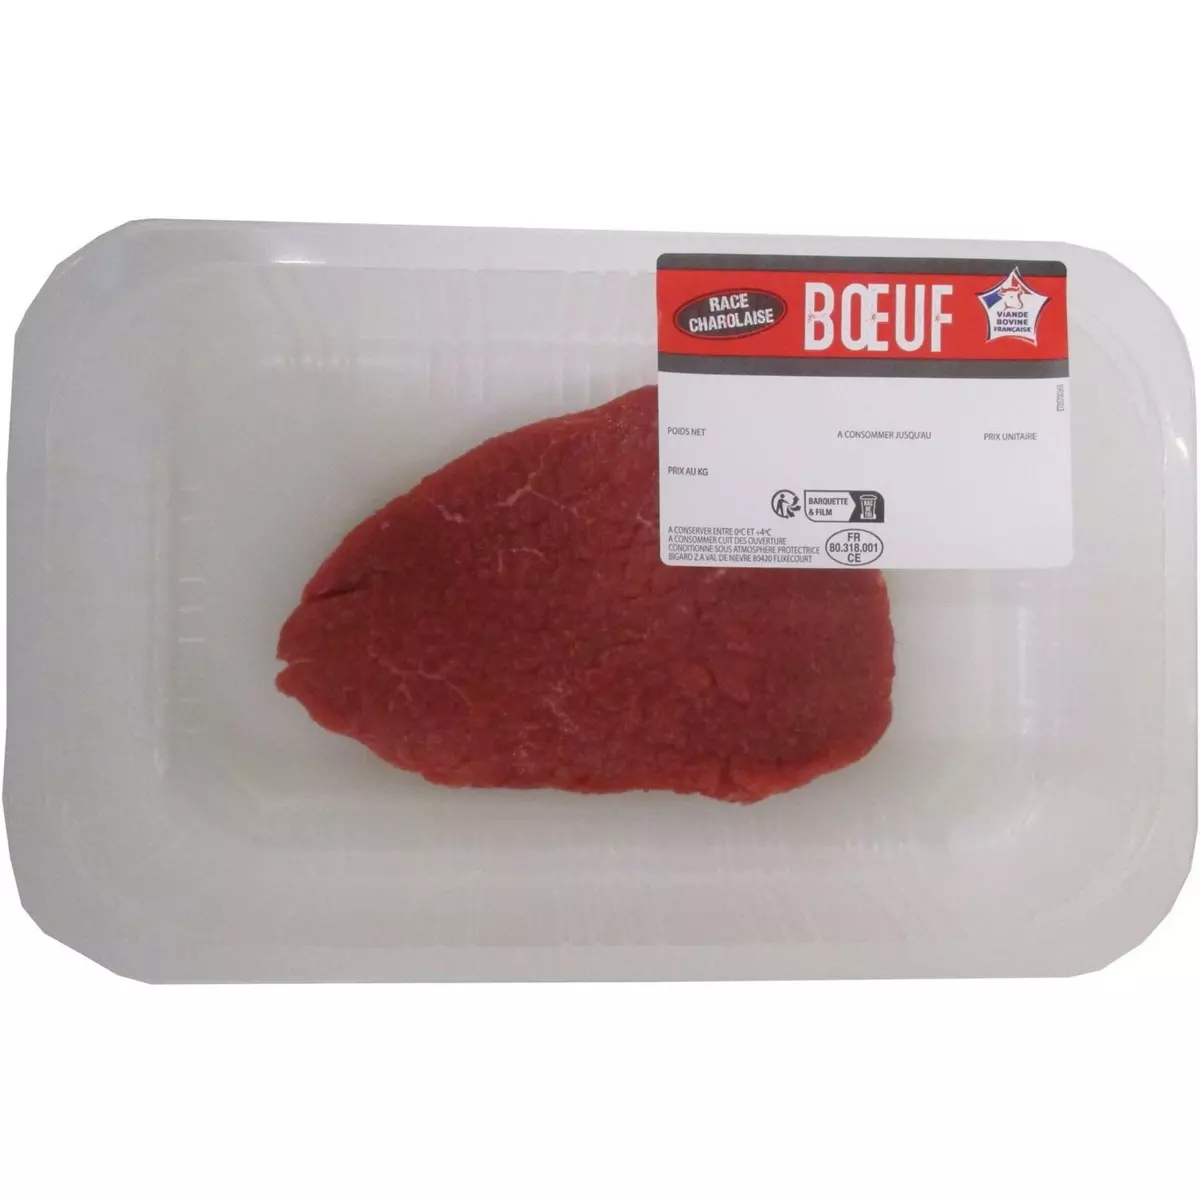 Steak haché 12%, Label rouge, Charal (x 2, 260 g)